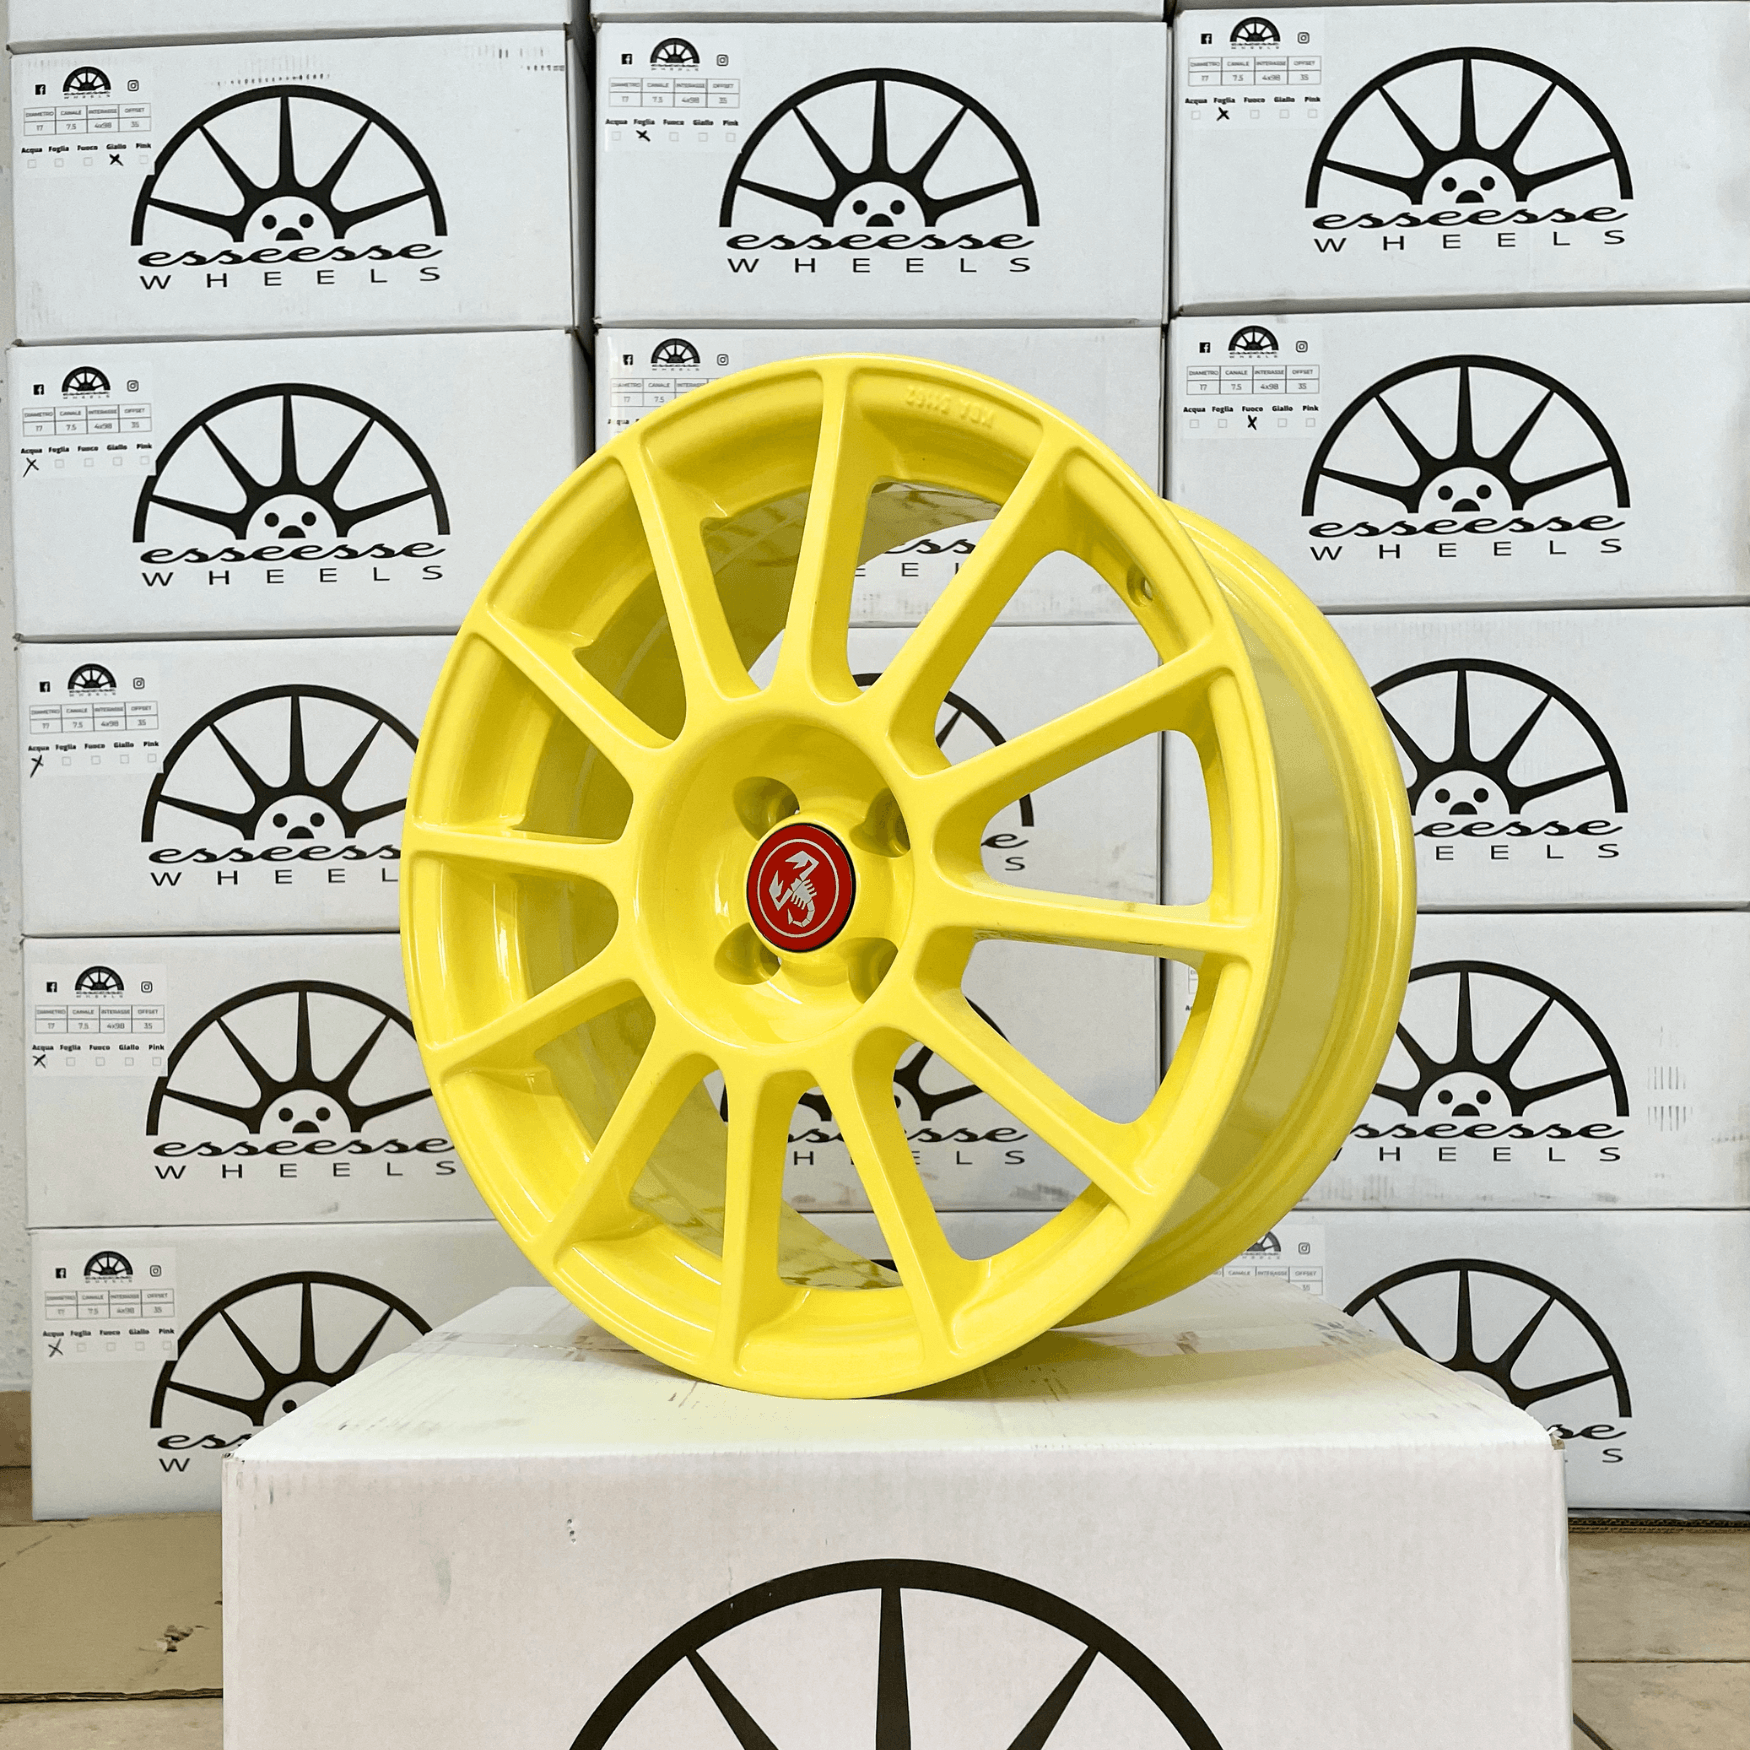 Abarth SS Limited Giallo wheels